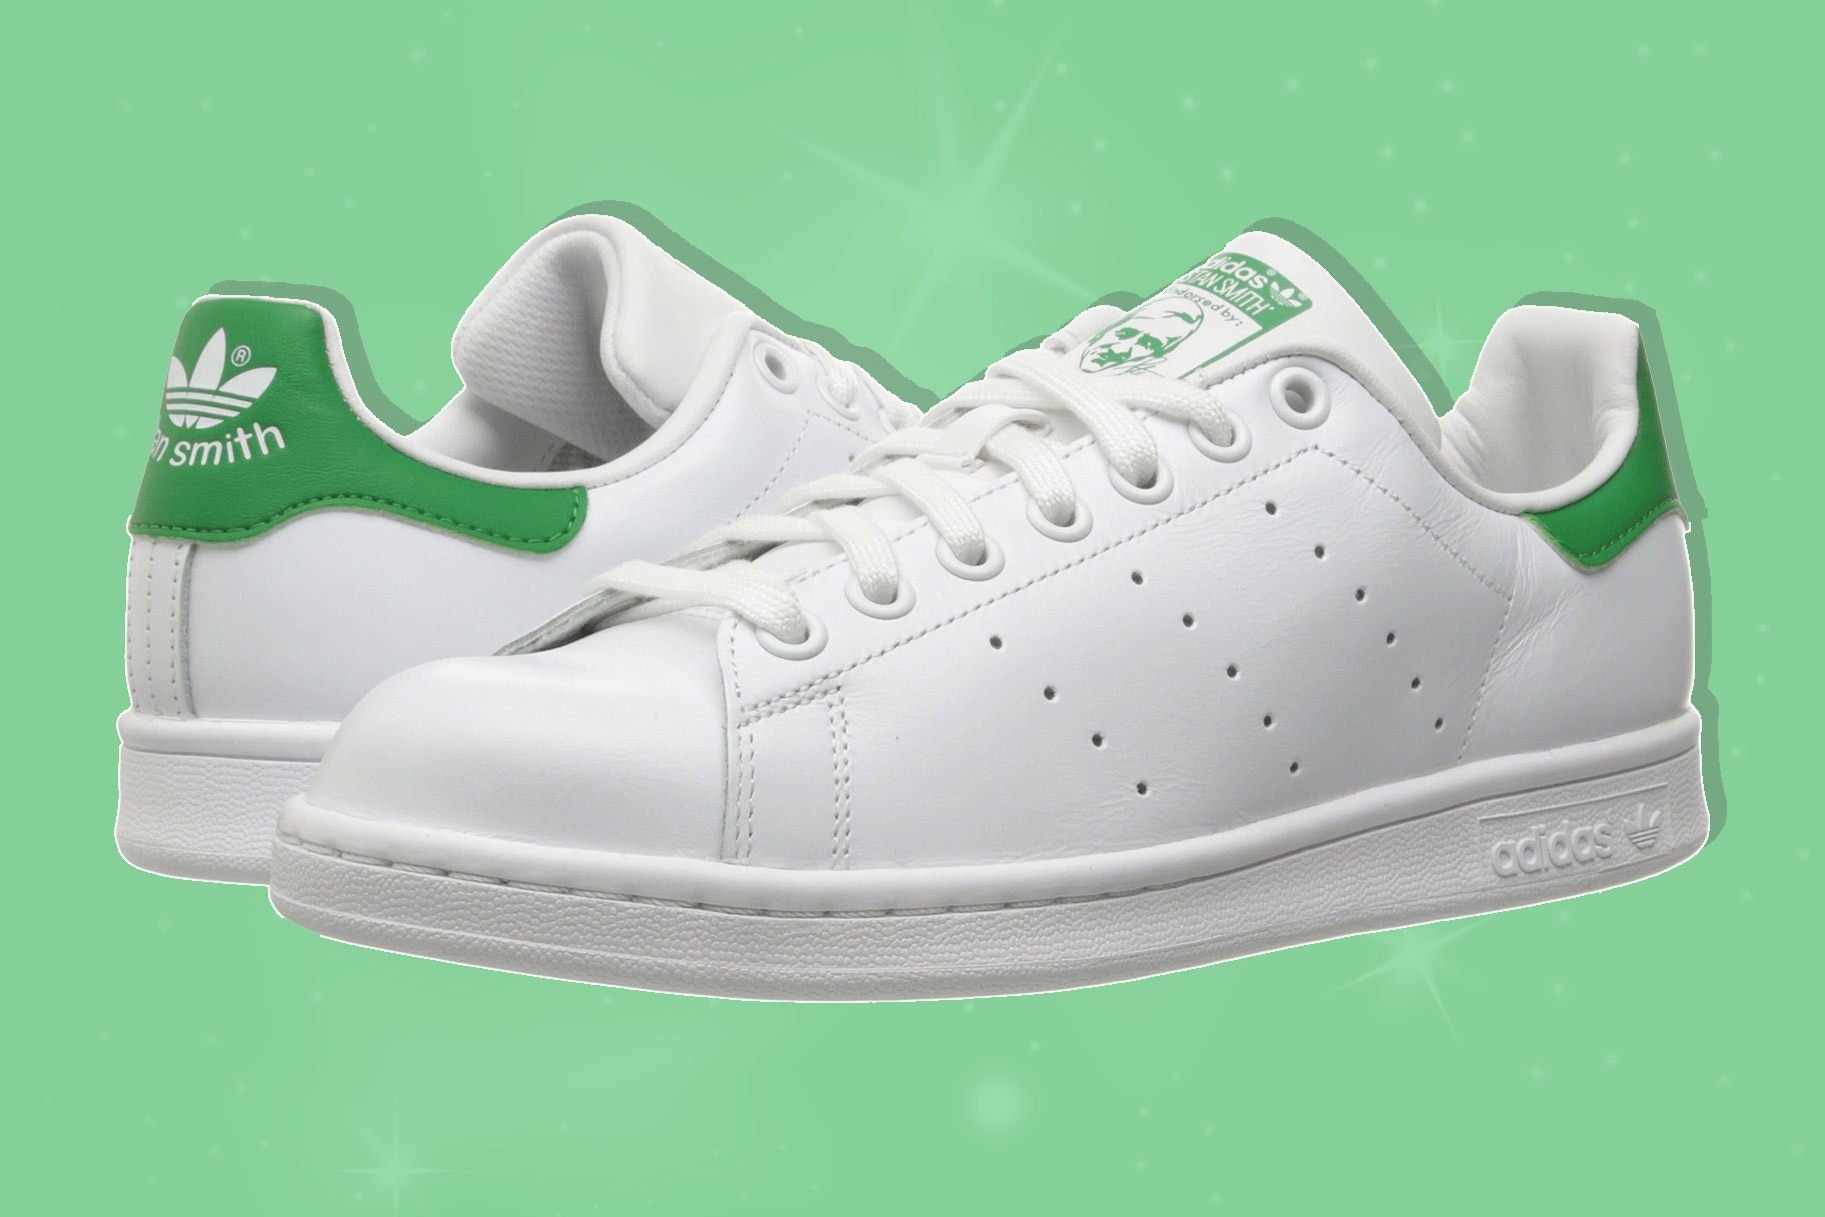 lacoste shoes vs stan smith - 51% OFF 